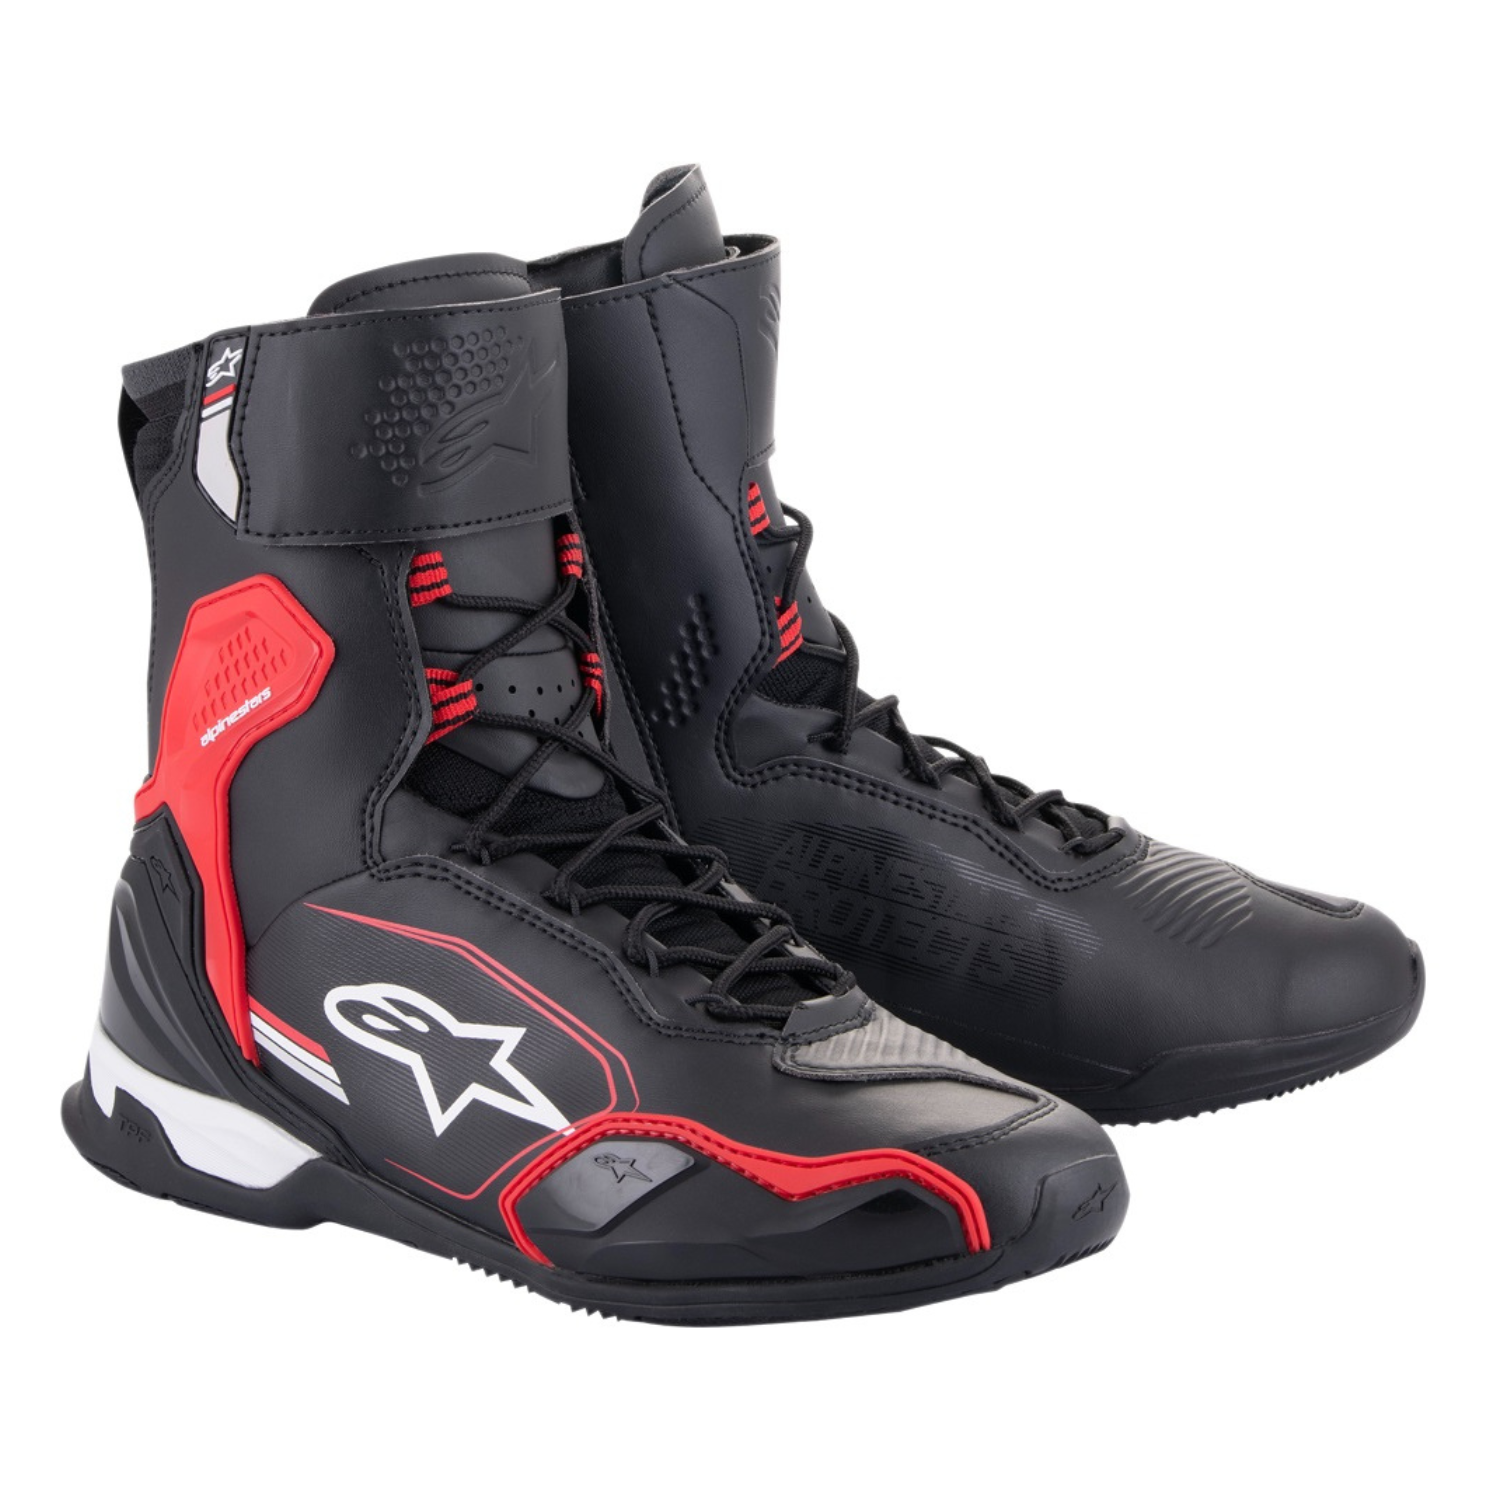 Image of EU Alpinestars Superfaster Shoes Black Bright Red White Taille US 85